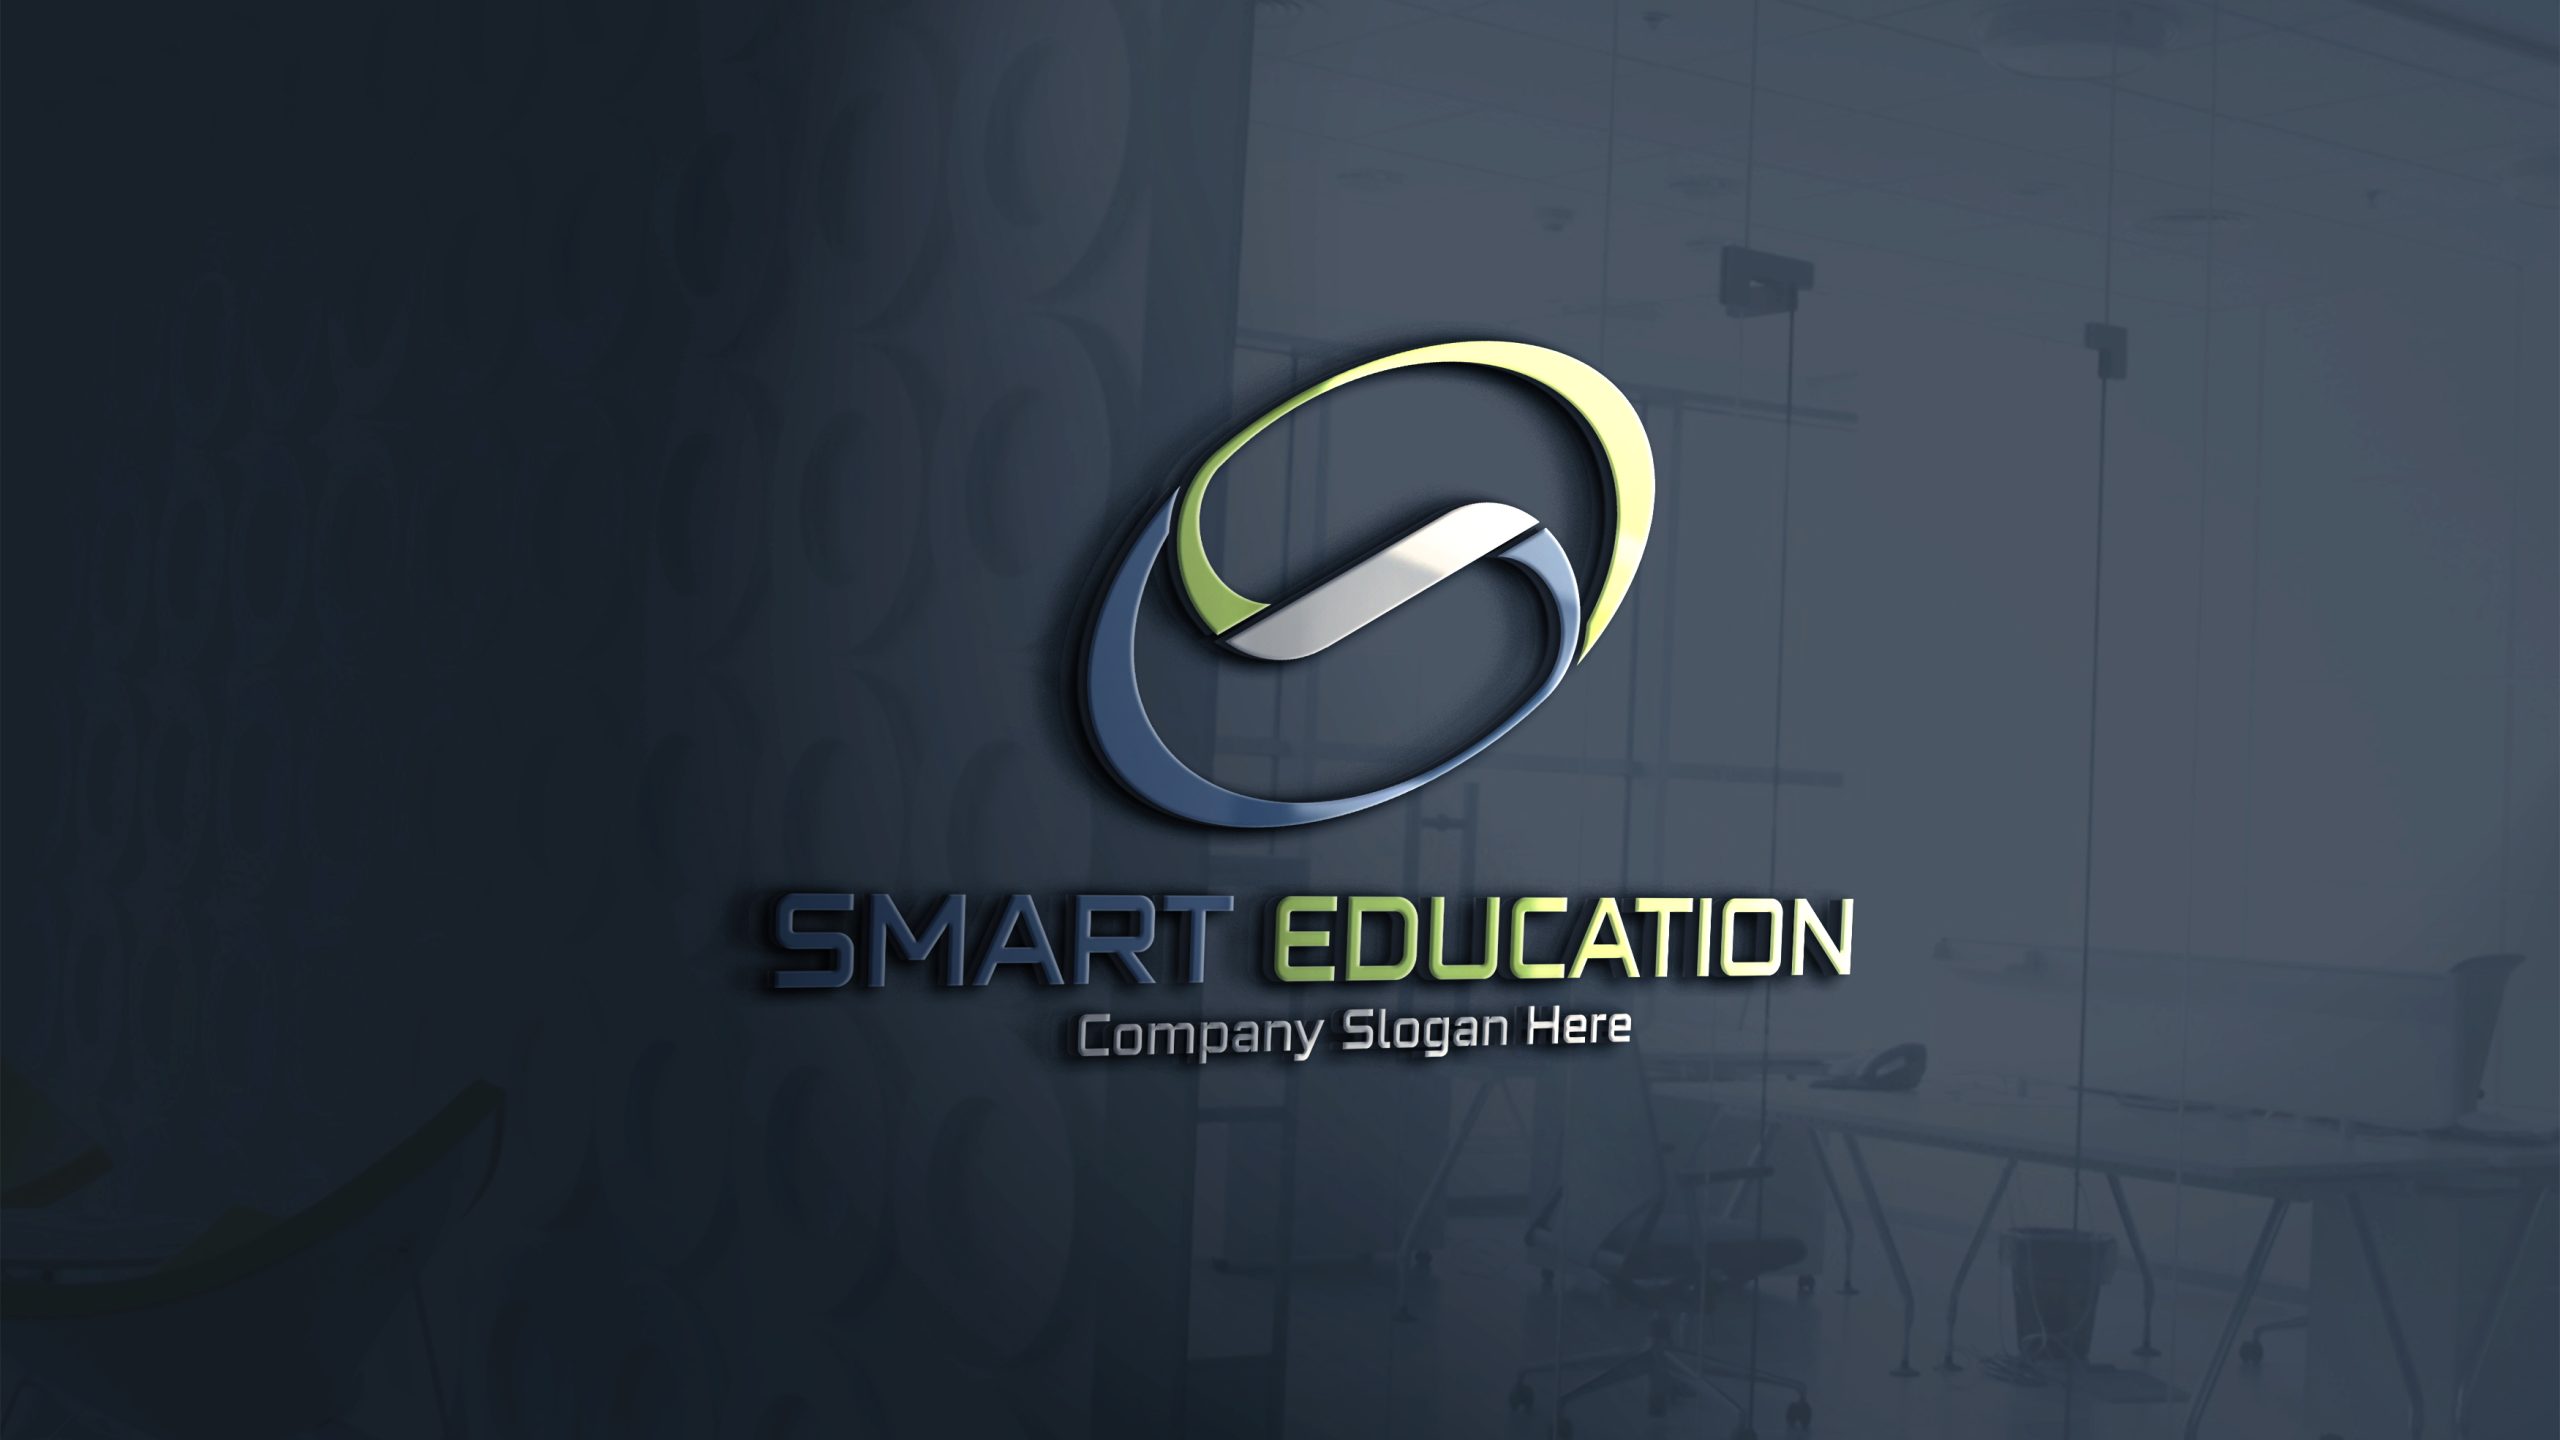 Reliance Smart Logo PNG and Vector File CDR EPS AI SVG